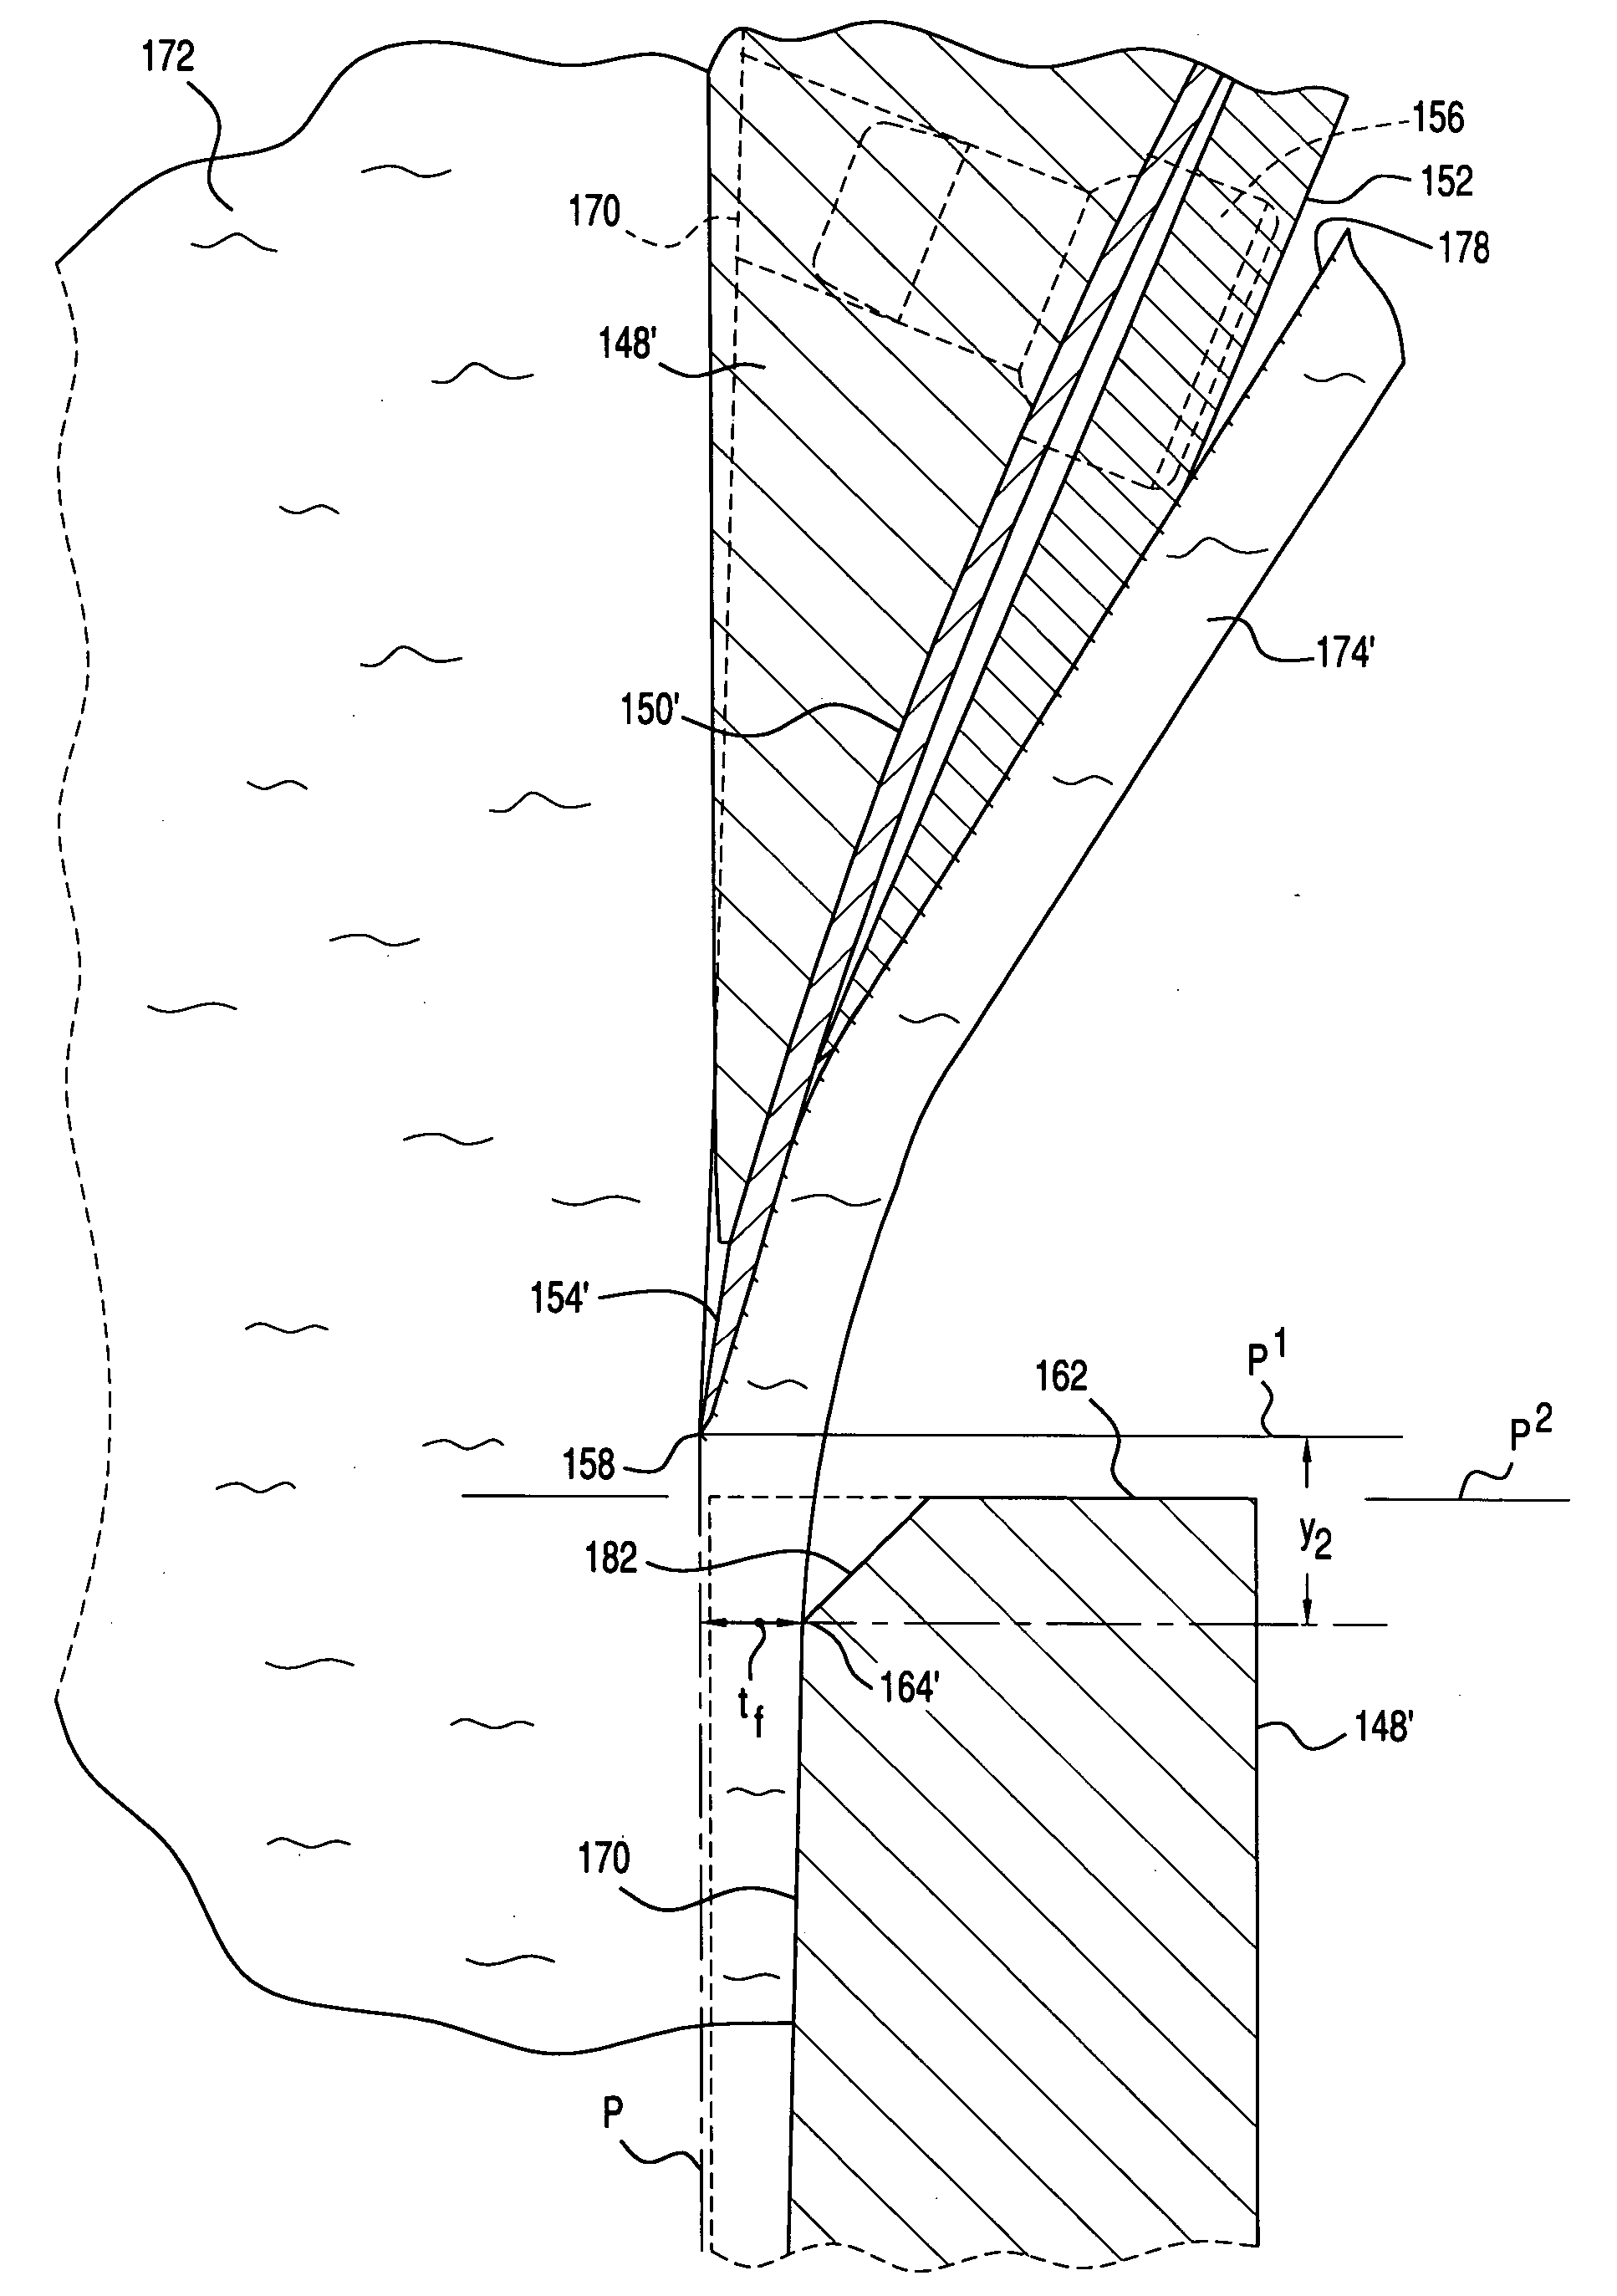 Knife arrangement for minimizing feathering during high speed cutting of food products